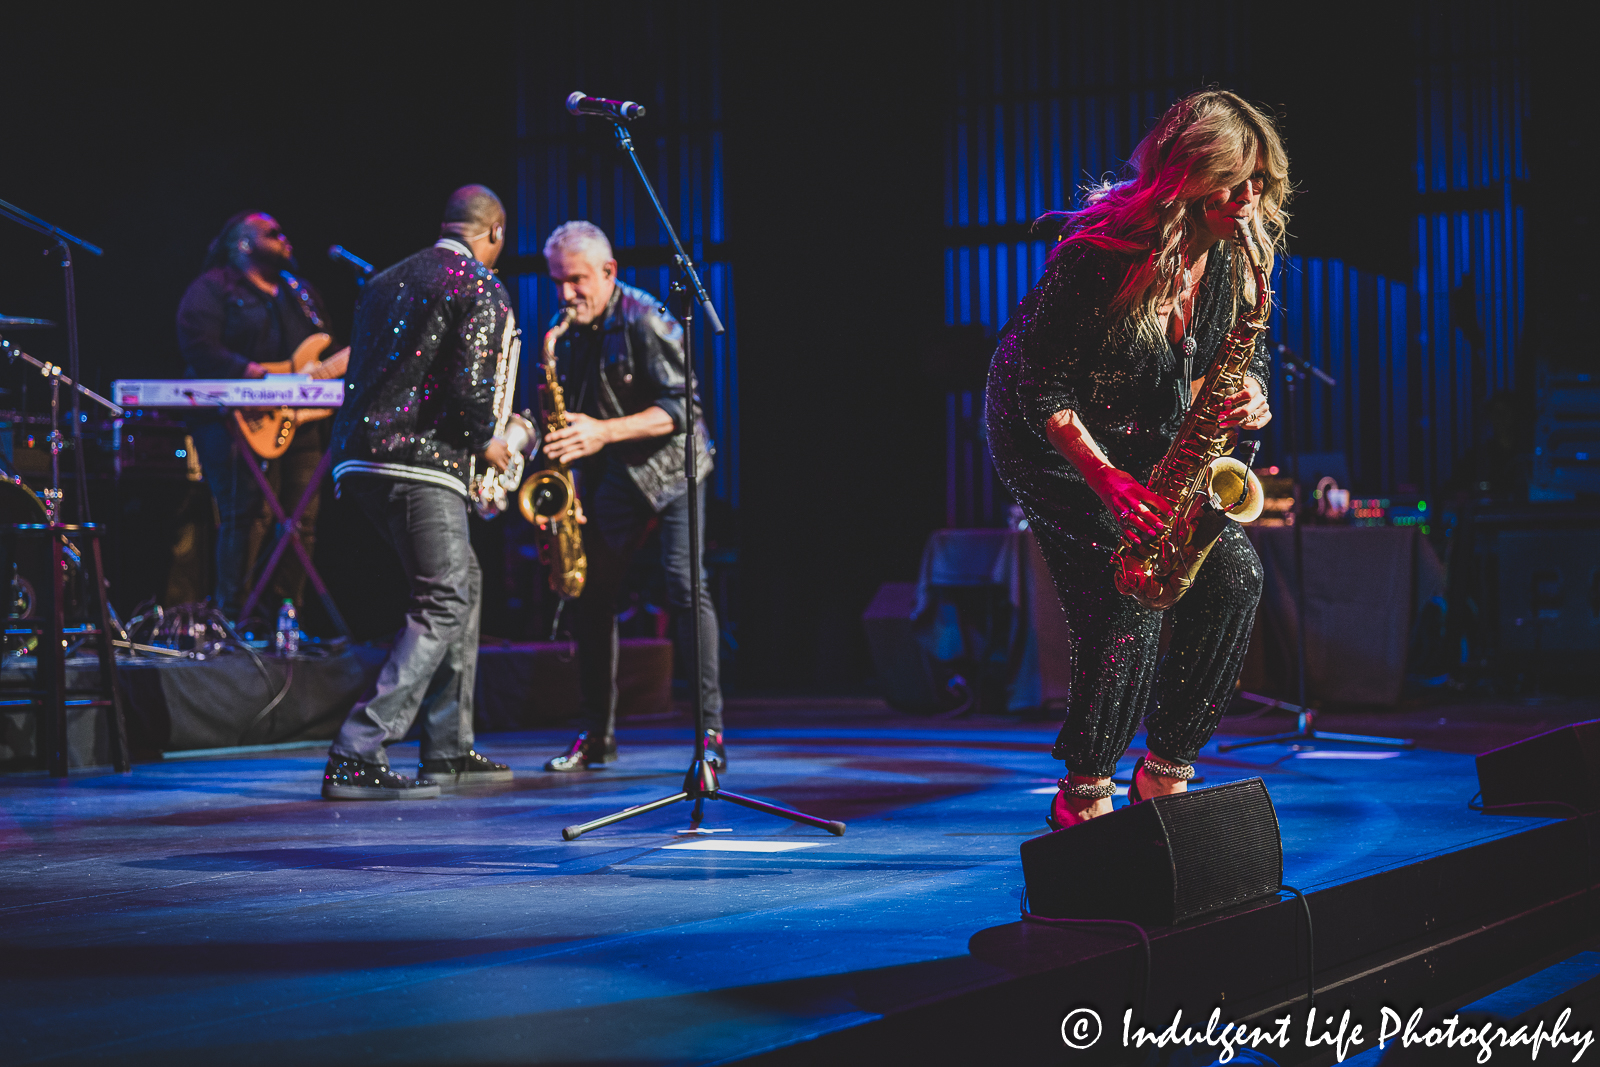 Candy Dulfer playing the saxophone live in concert at Kauffman Center for the Performing Arts in downtown Kansas City, MO on July 15, 2023.